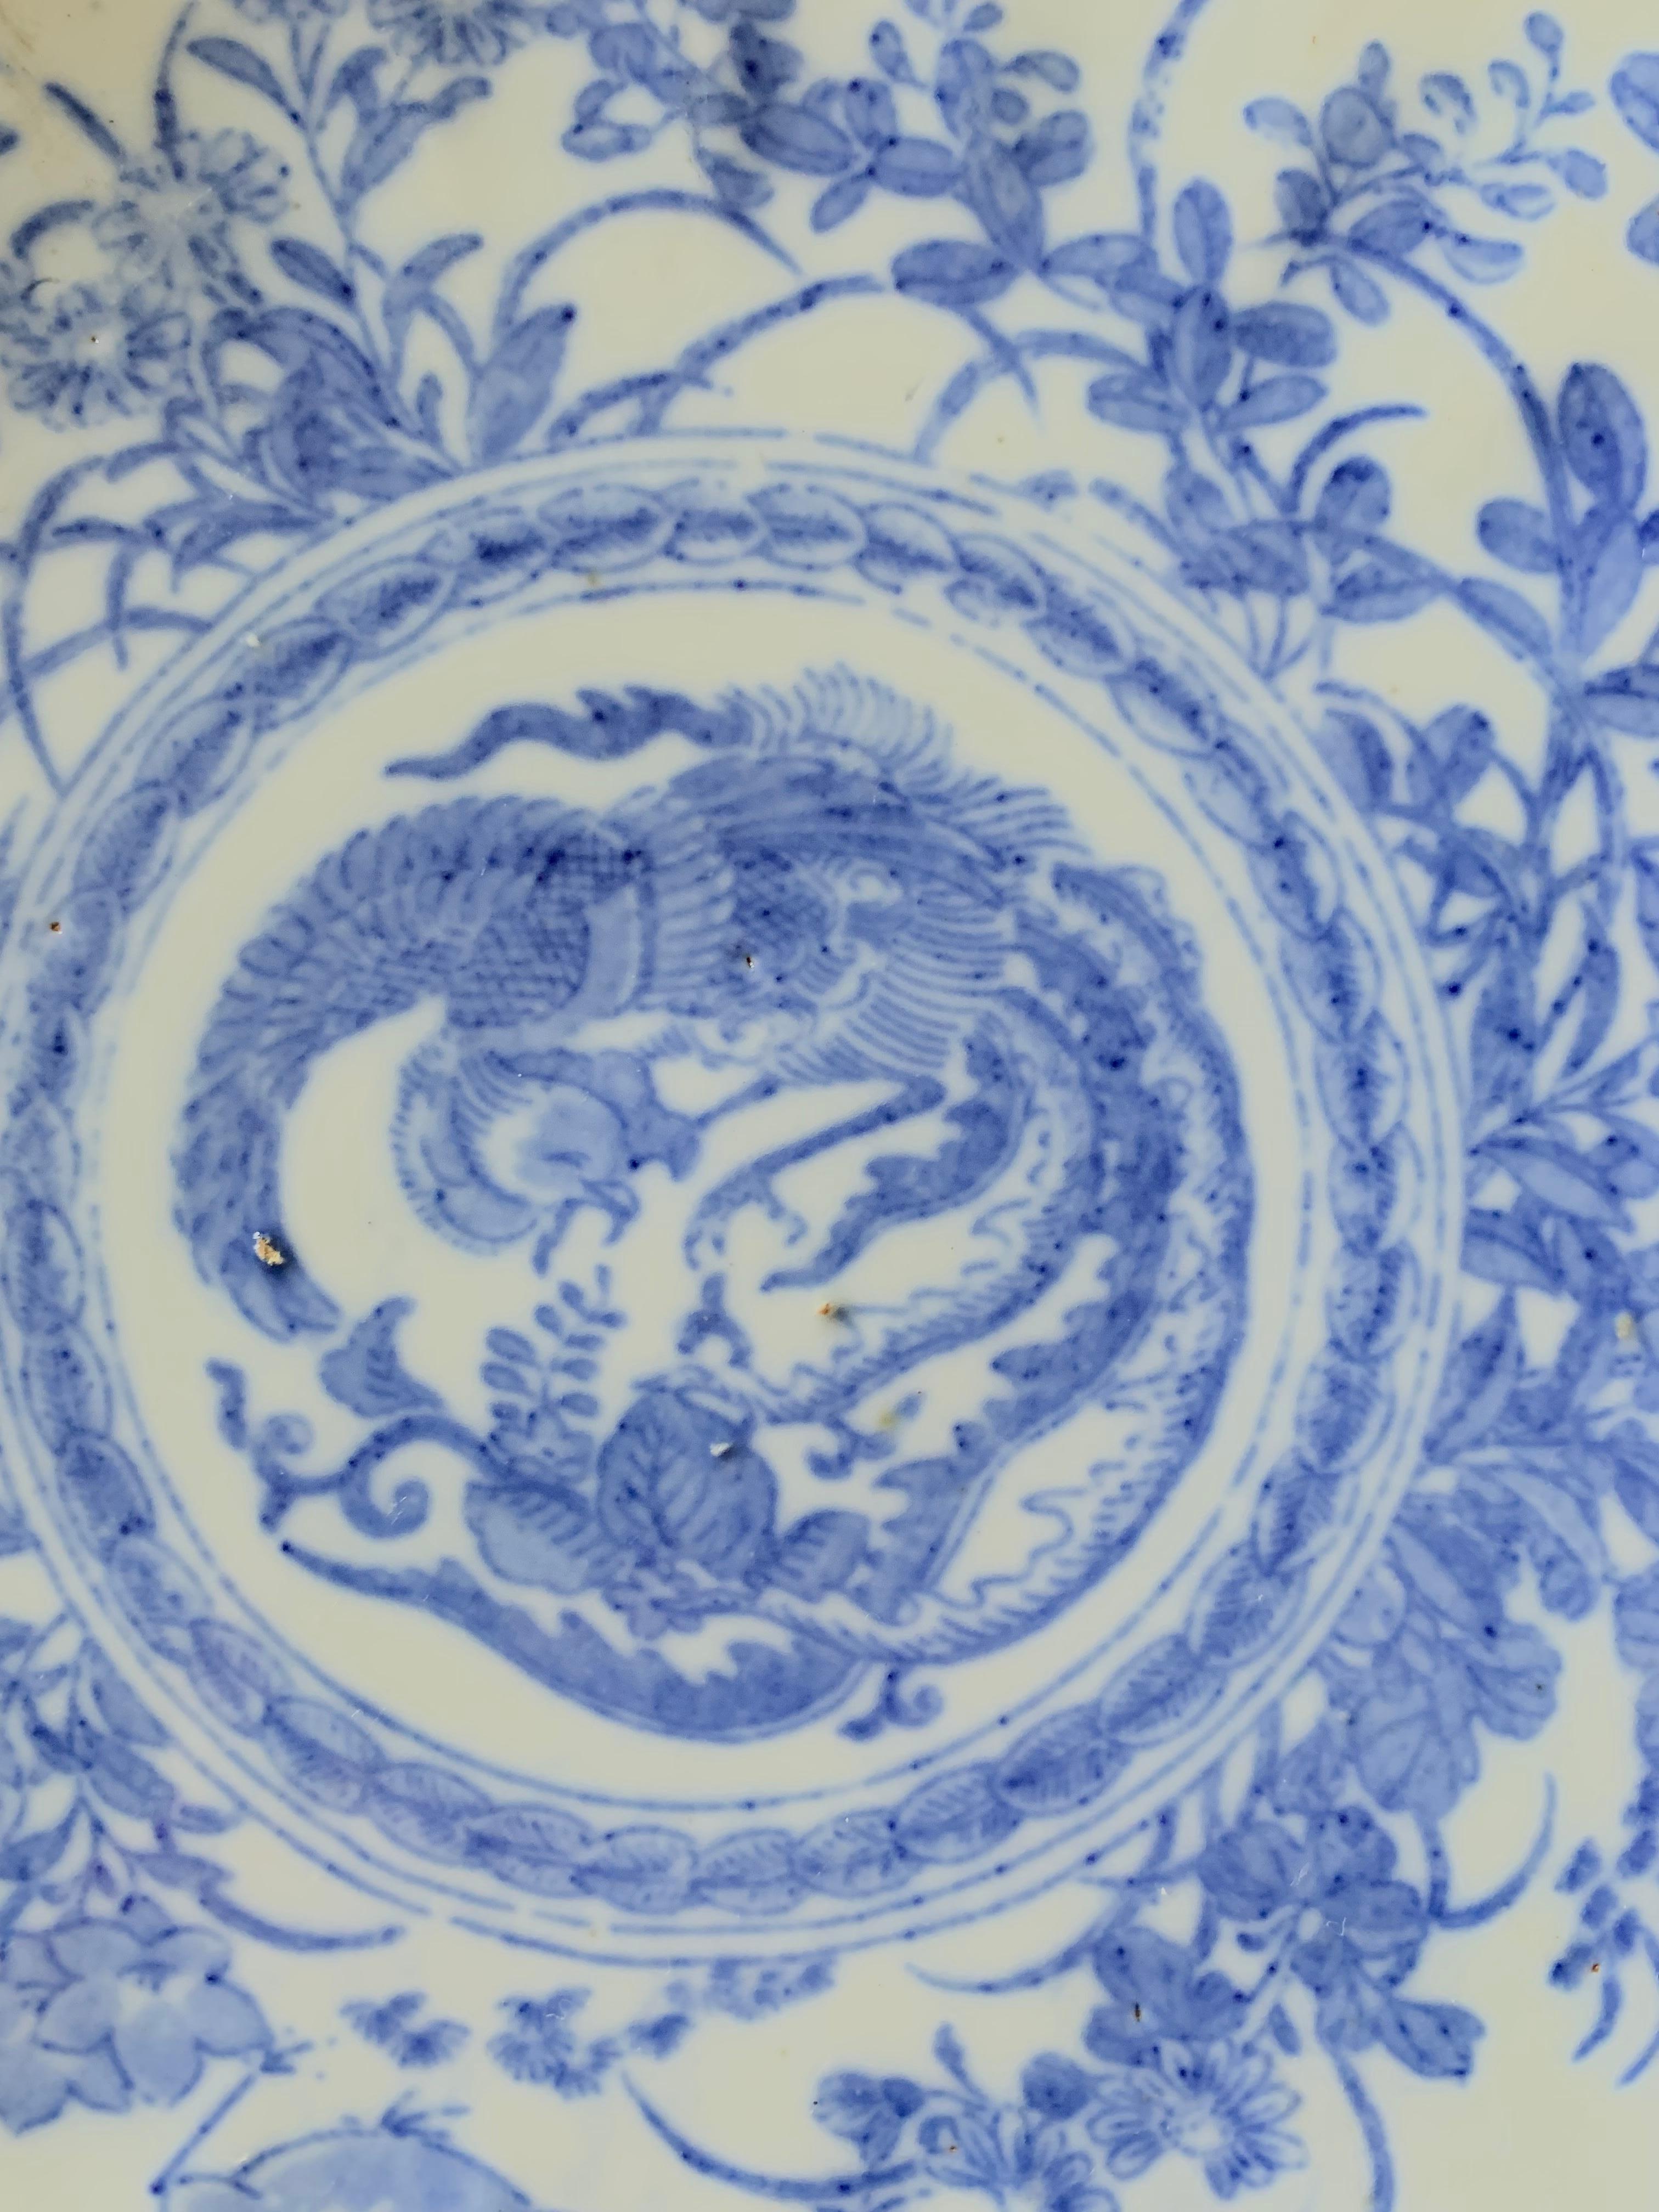 Nice plate inspired the Compagnie des Indes from the Qianlong period, XVIIIth century, But dating from the middle of 19th Century. 
It presents a decoration of birds, Flowers and foliages. It’s probably print. This porcelain is characteristic of